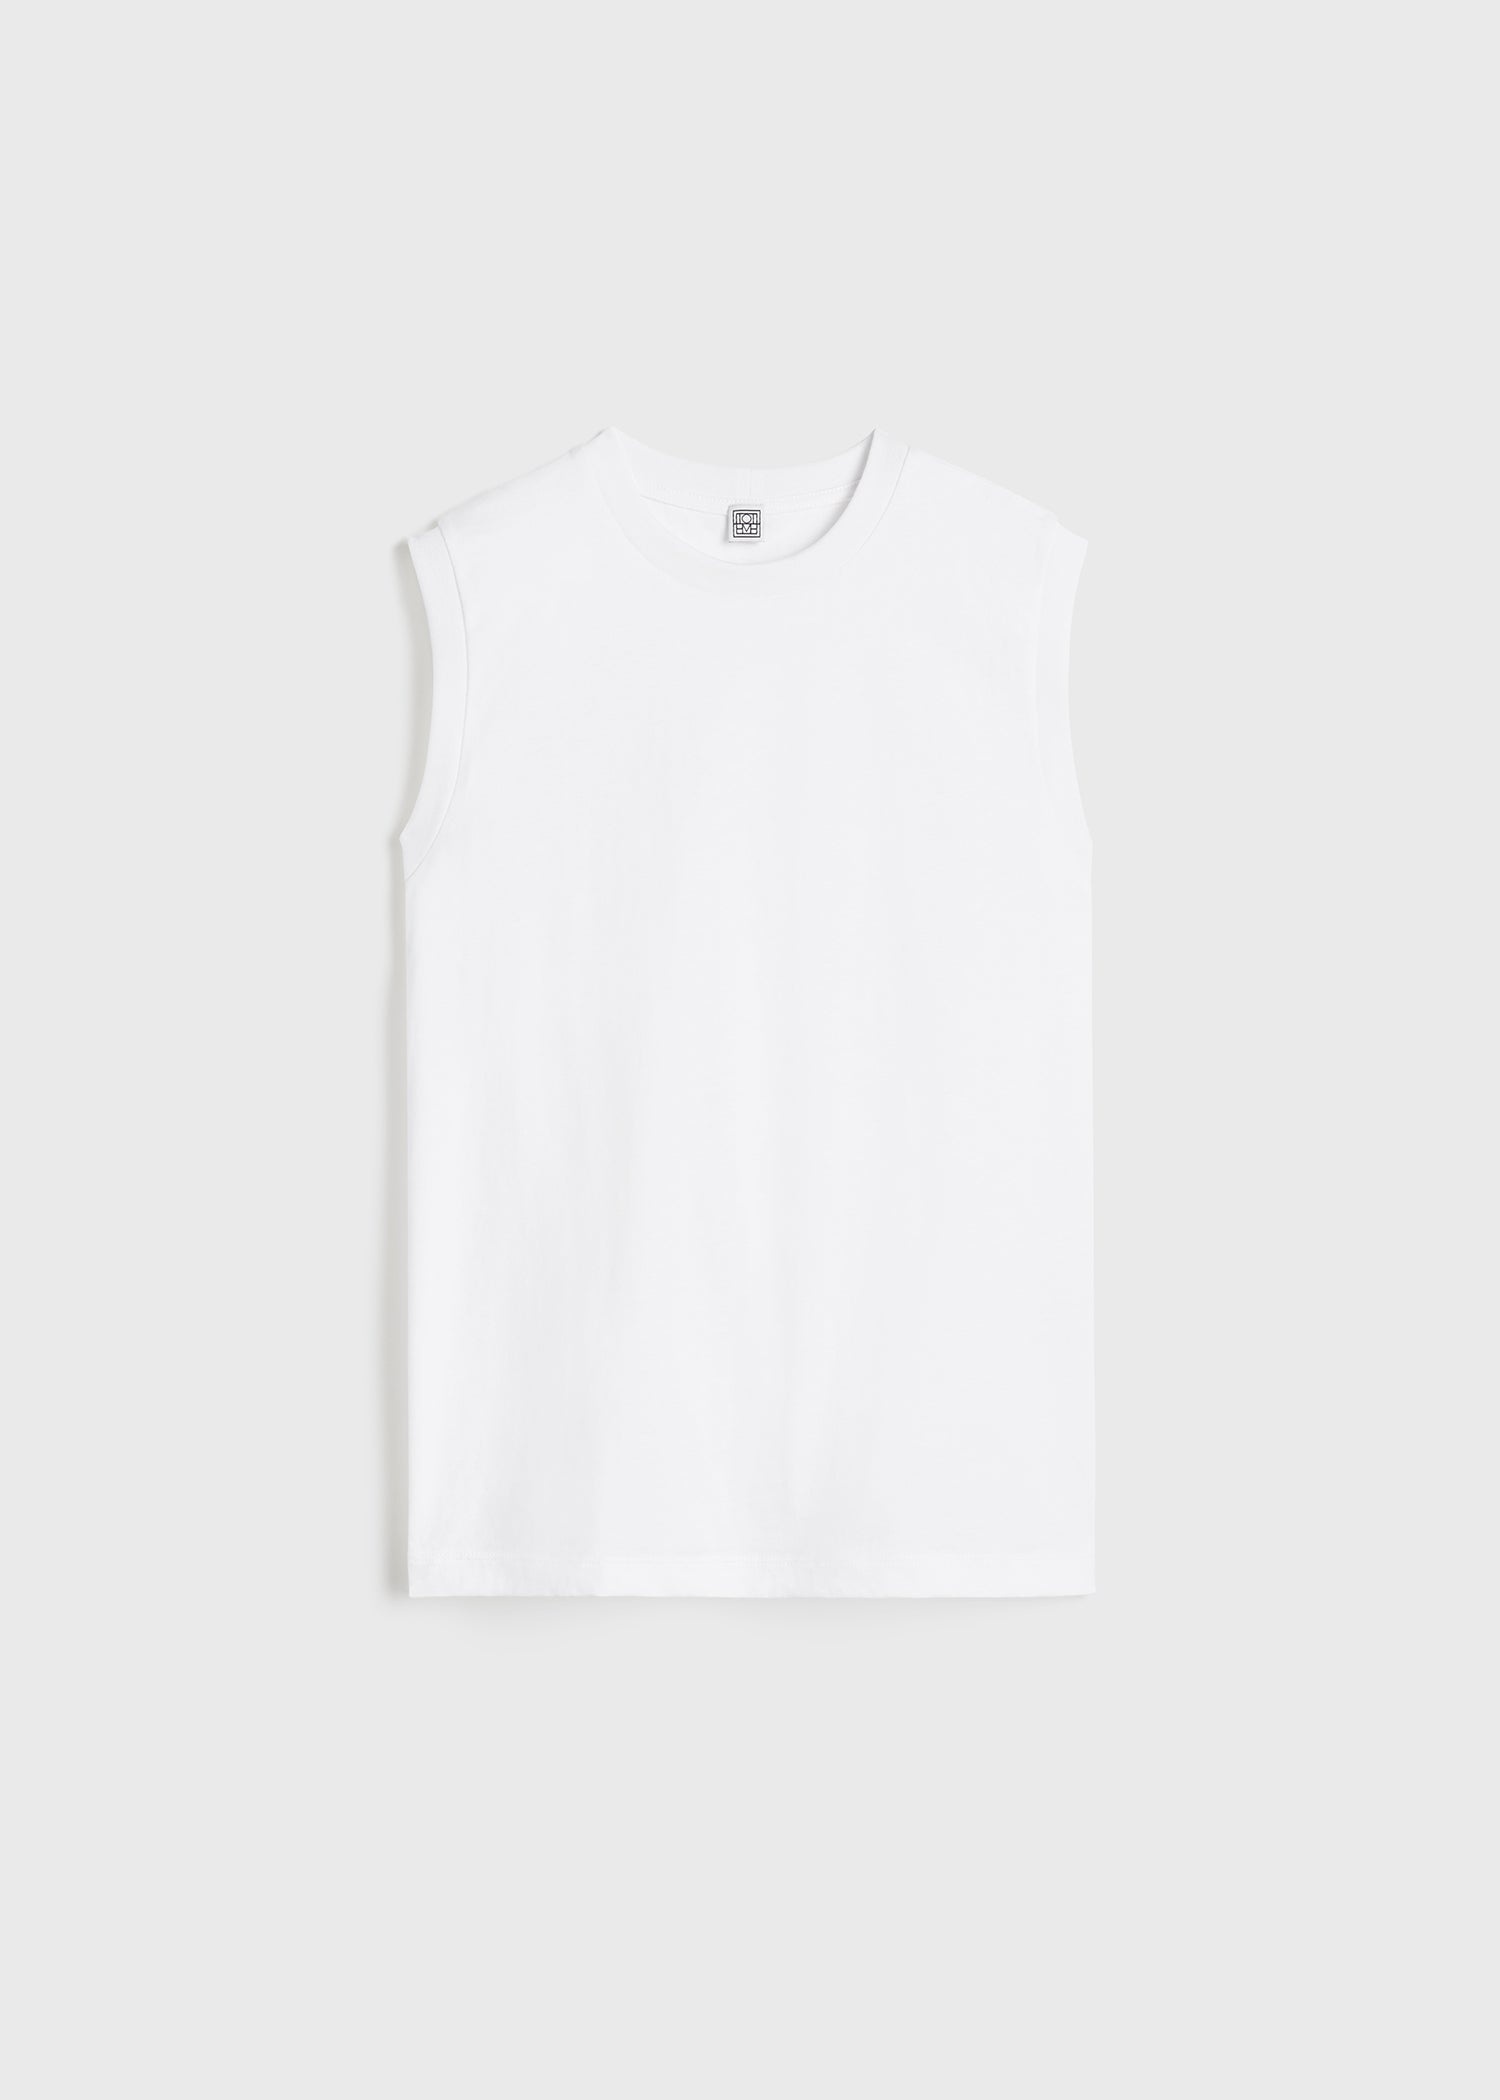 Relaxed sleeveless tee off white - 1